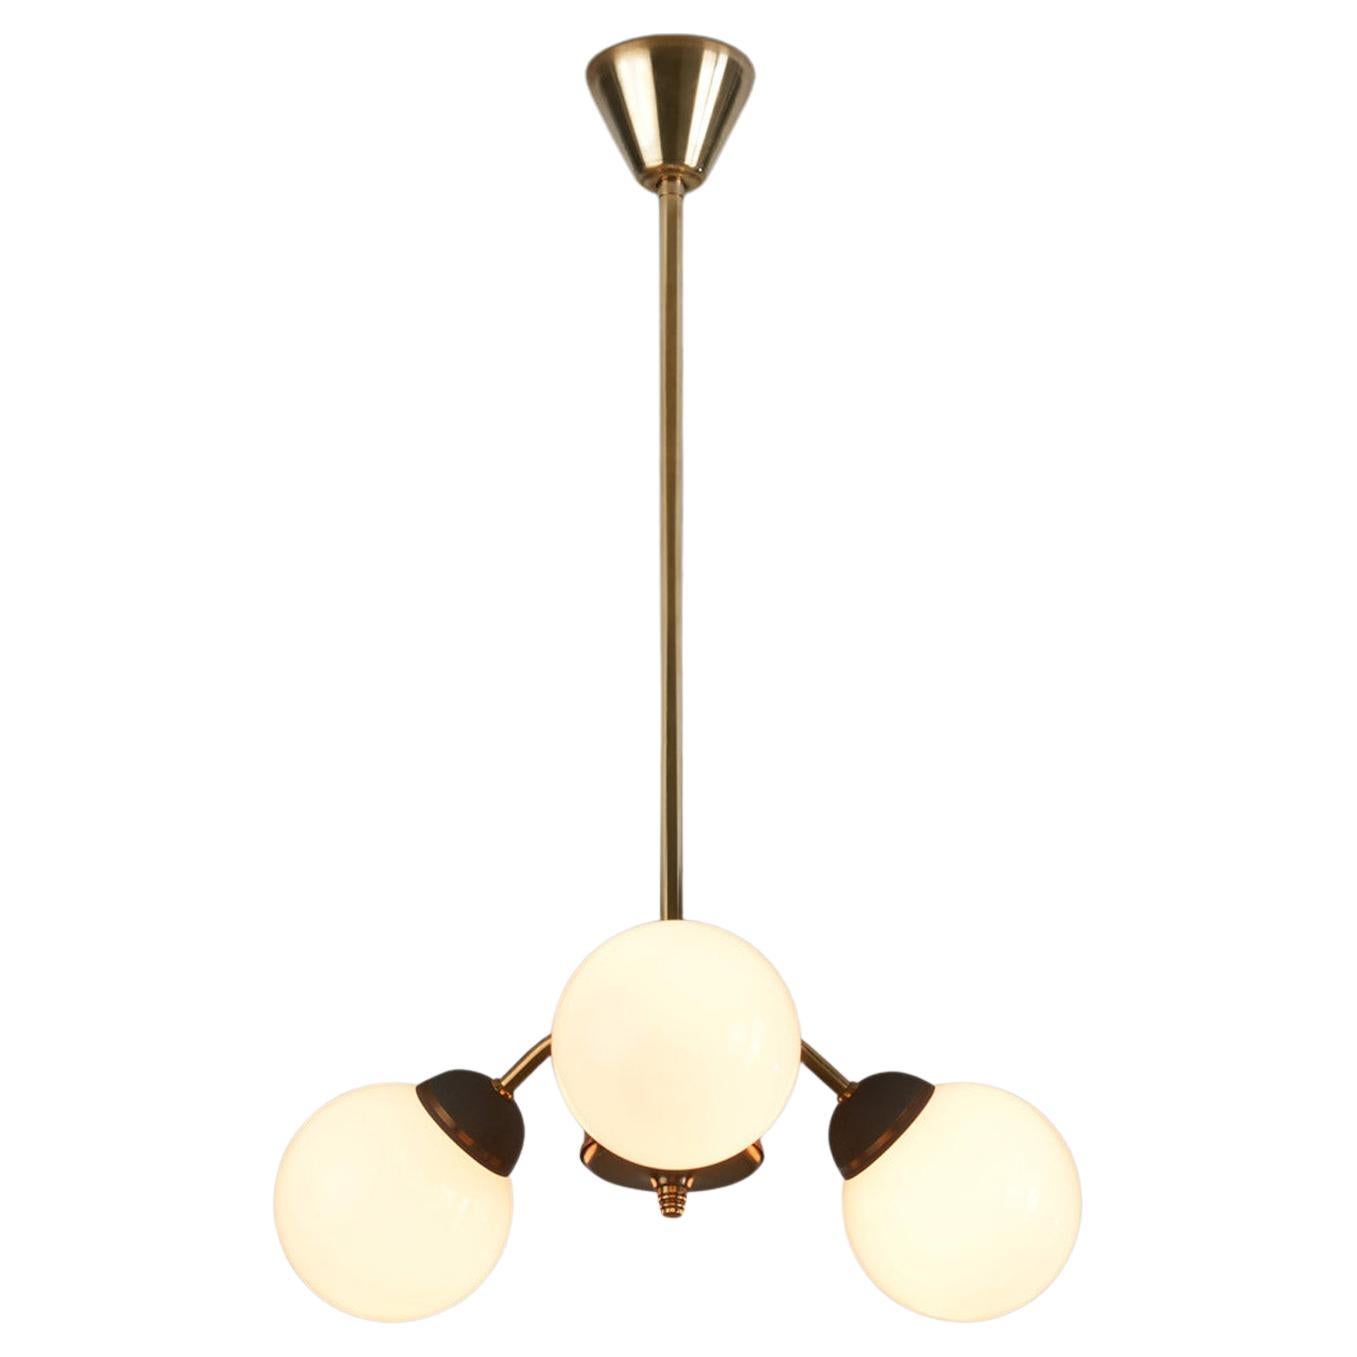 Brass Three-Armed Ceiling Lamp with Opal Glass Shades, Scandinavia 1950s